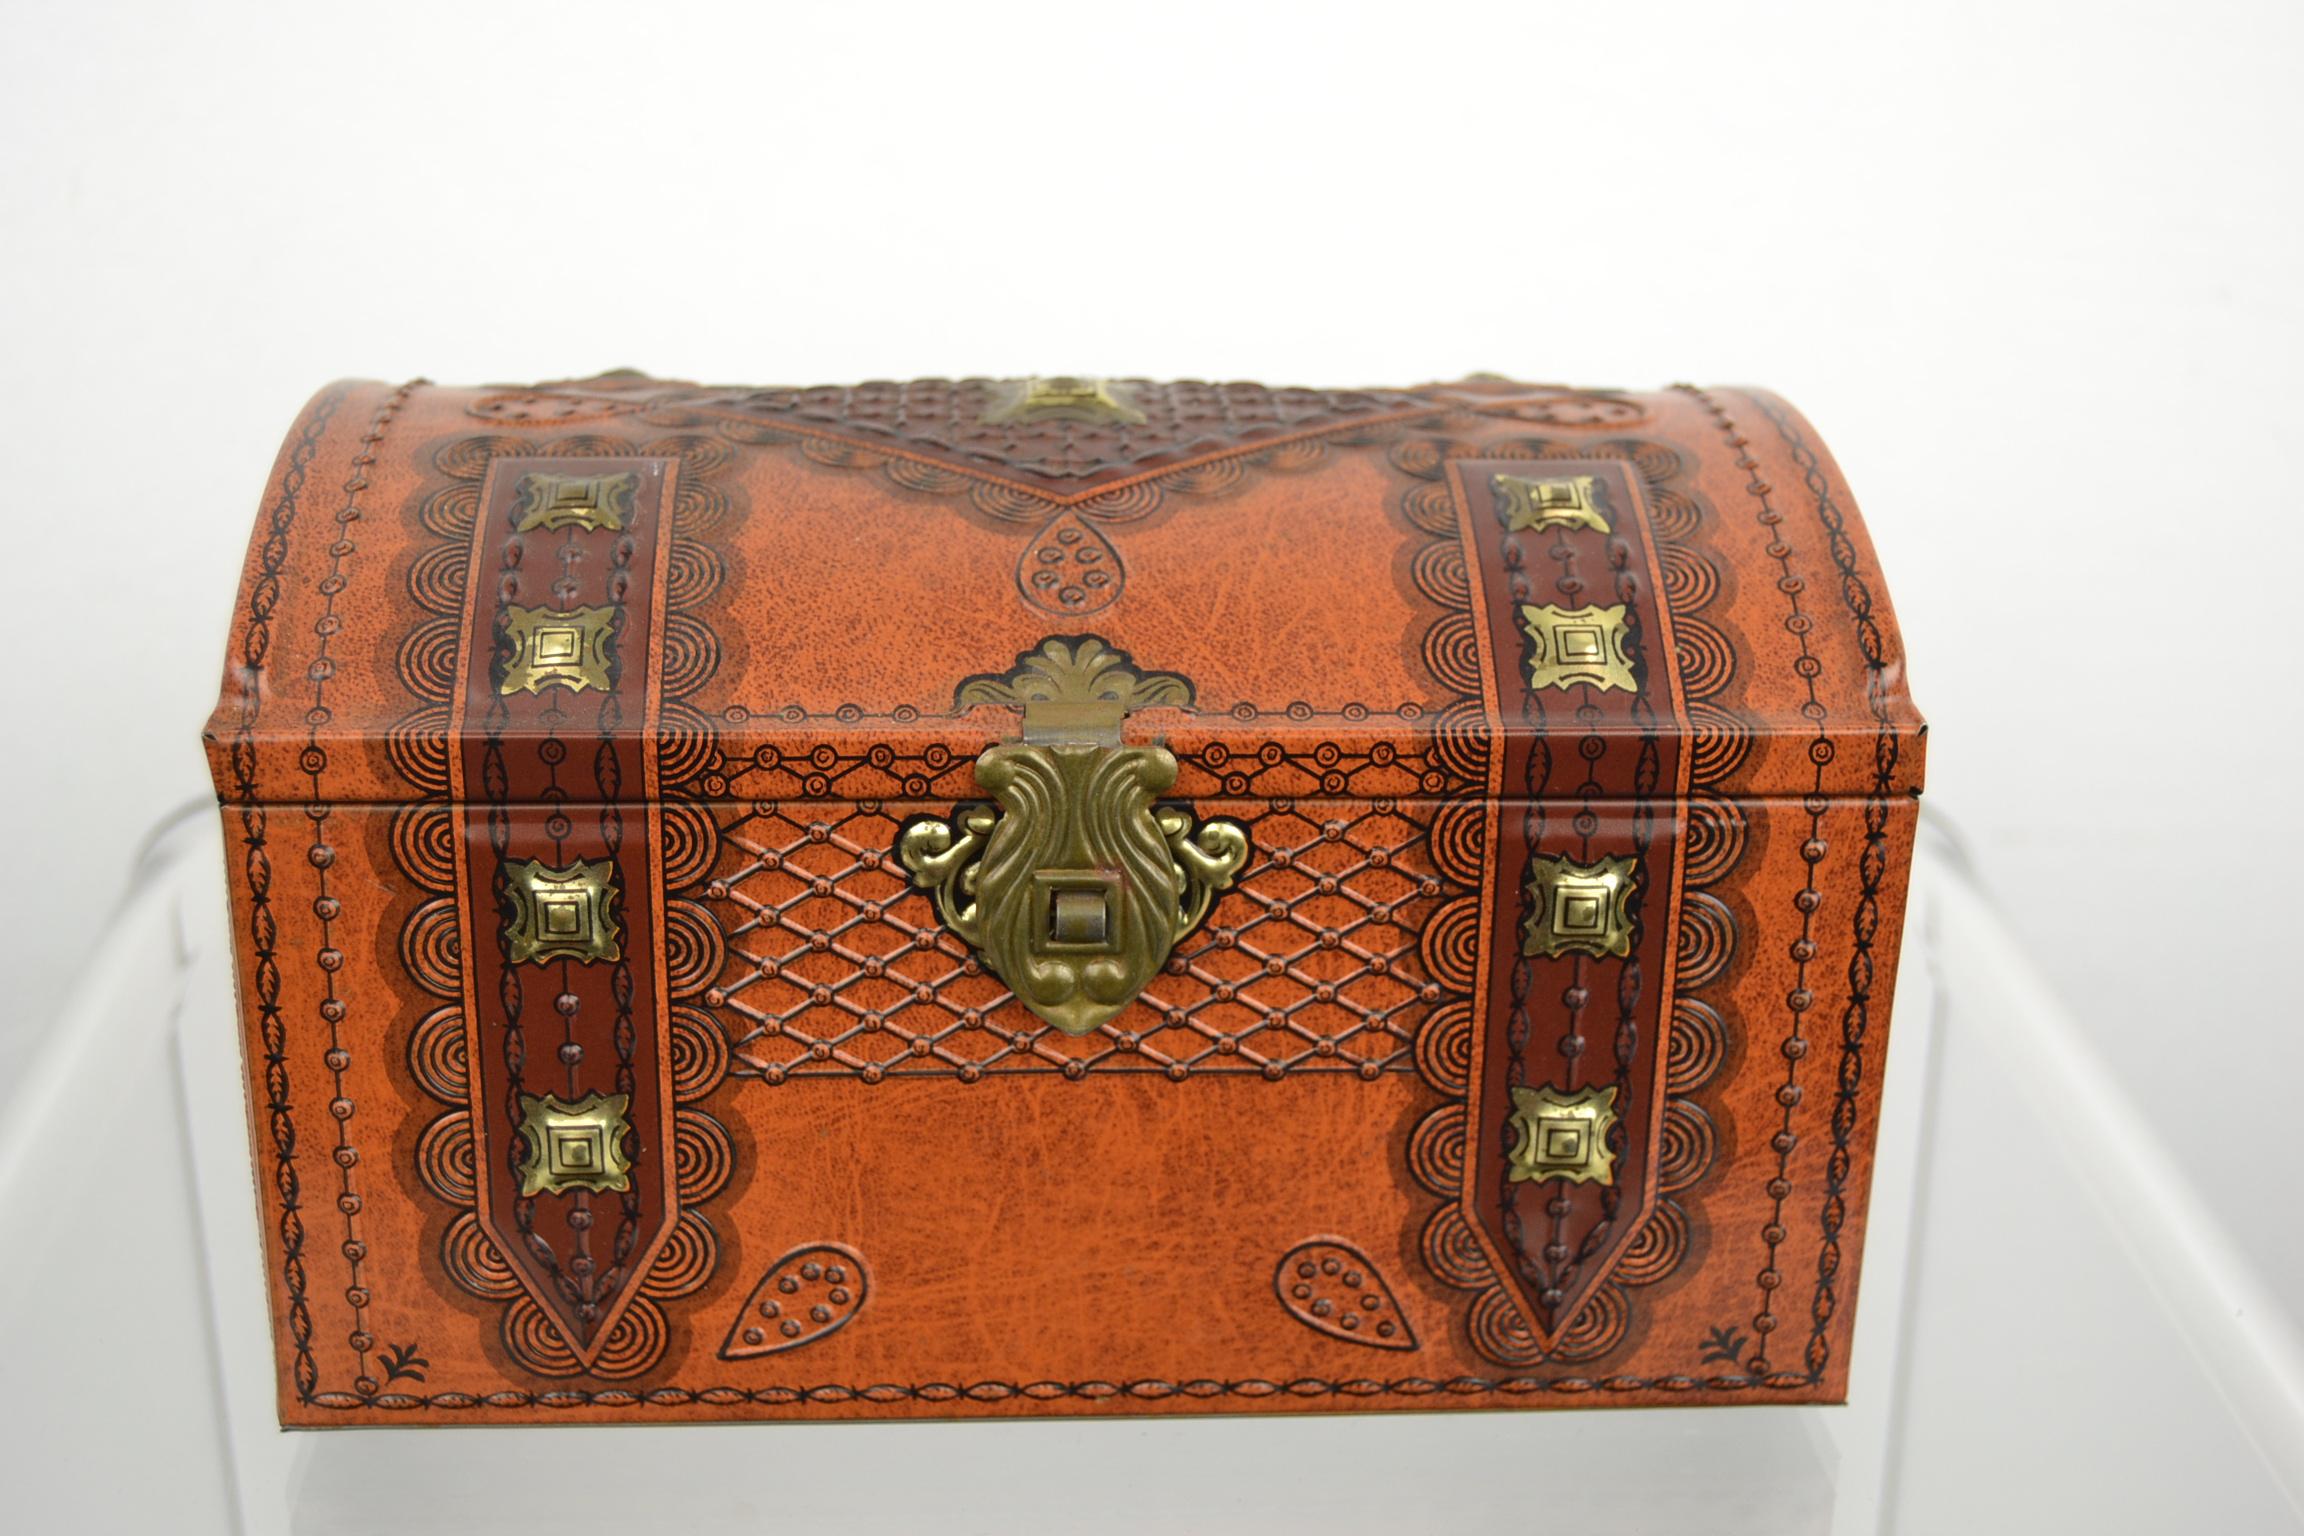 Treasury tin or coffer tin with beautiful lion heads on.
This vintage tin box has a beautiful shape, a rounded lid, embossed lion heads left and right,
a lock, embossed gold colored details and beautiful black details like circles and